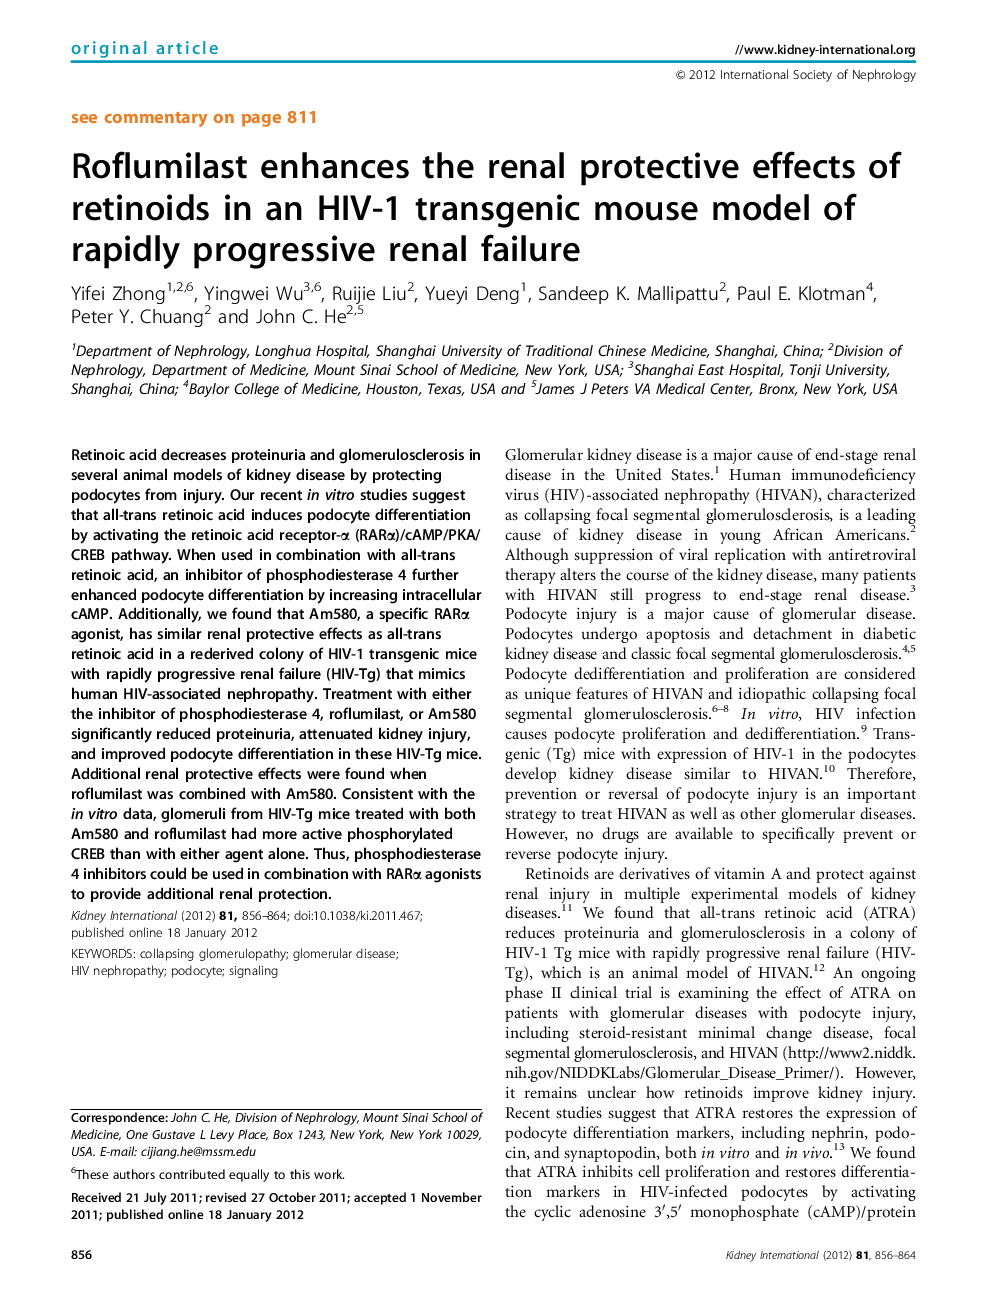 Roflumilast enhances the renal protective effects of retinoids in an HIV-1 transgenic mouse model of rapidly progressive renal failure